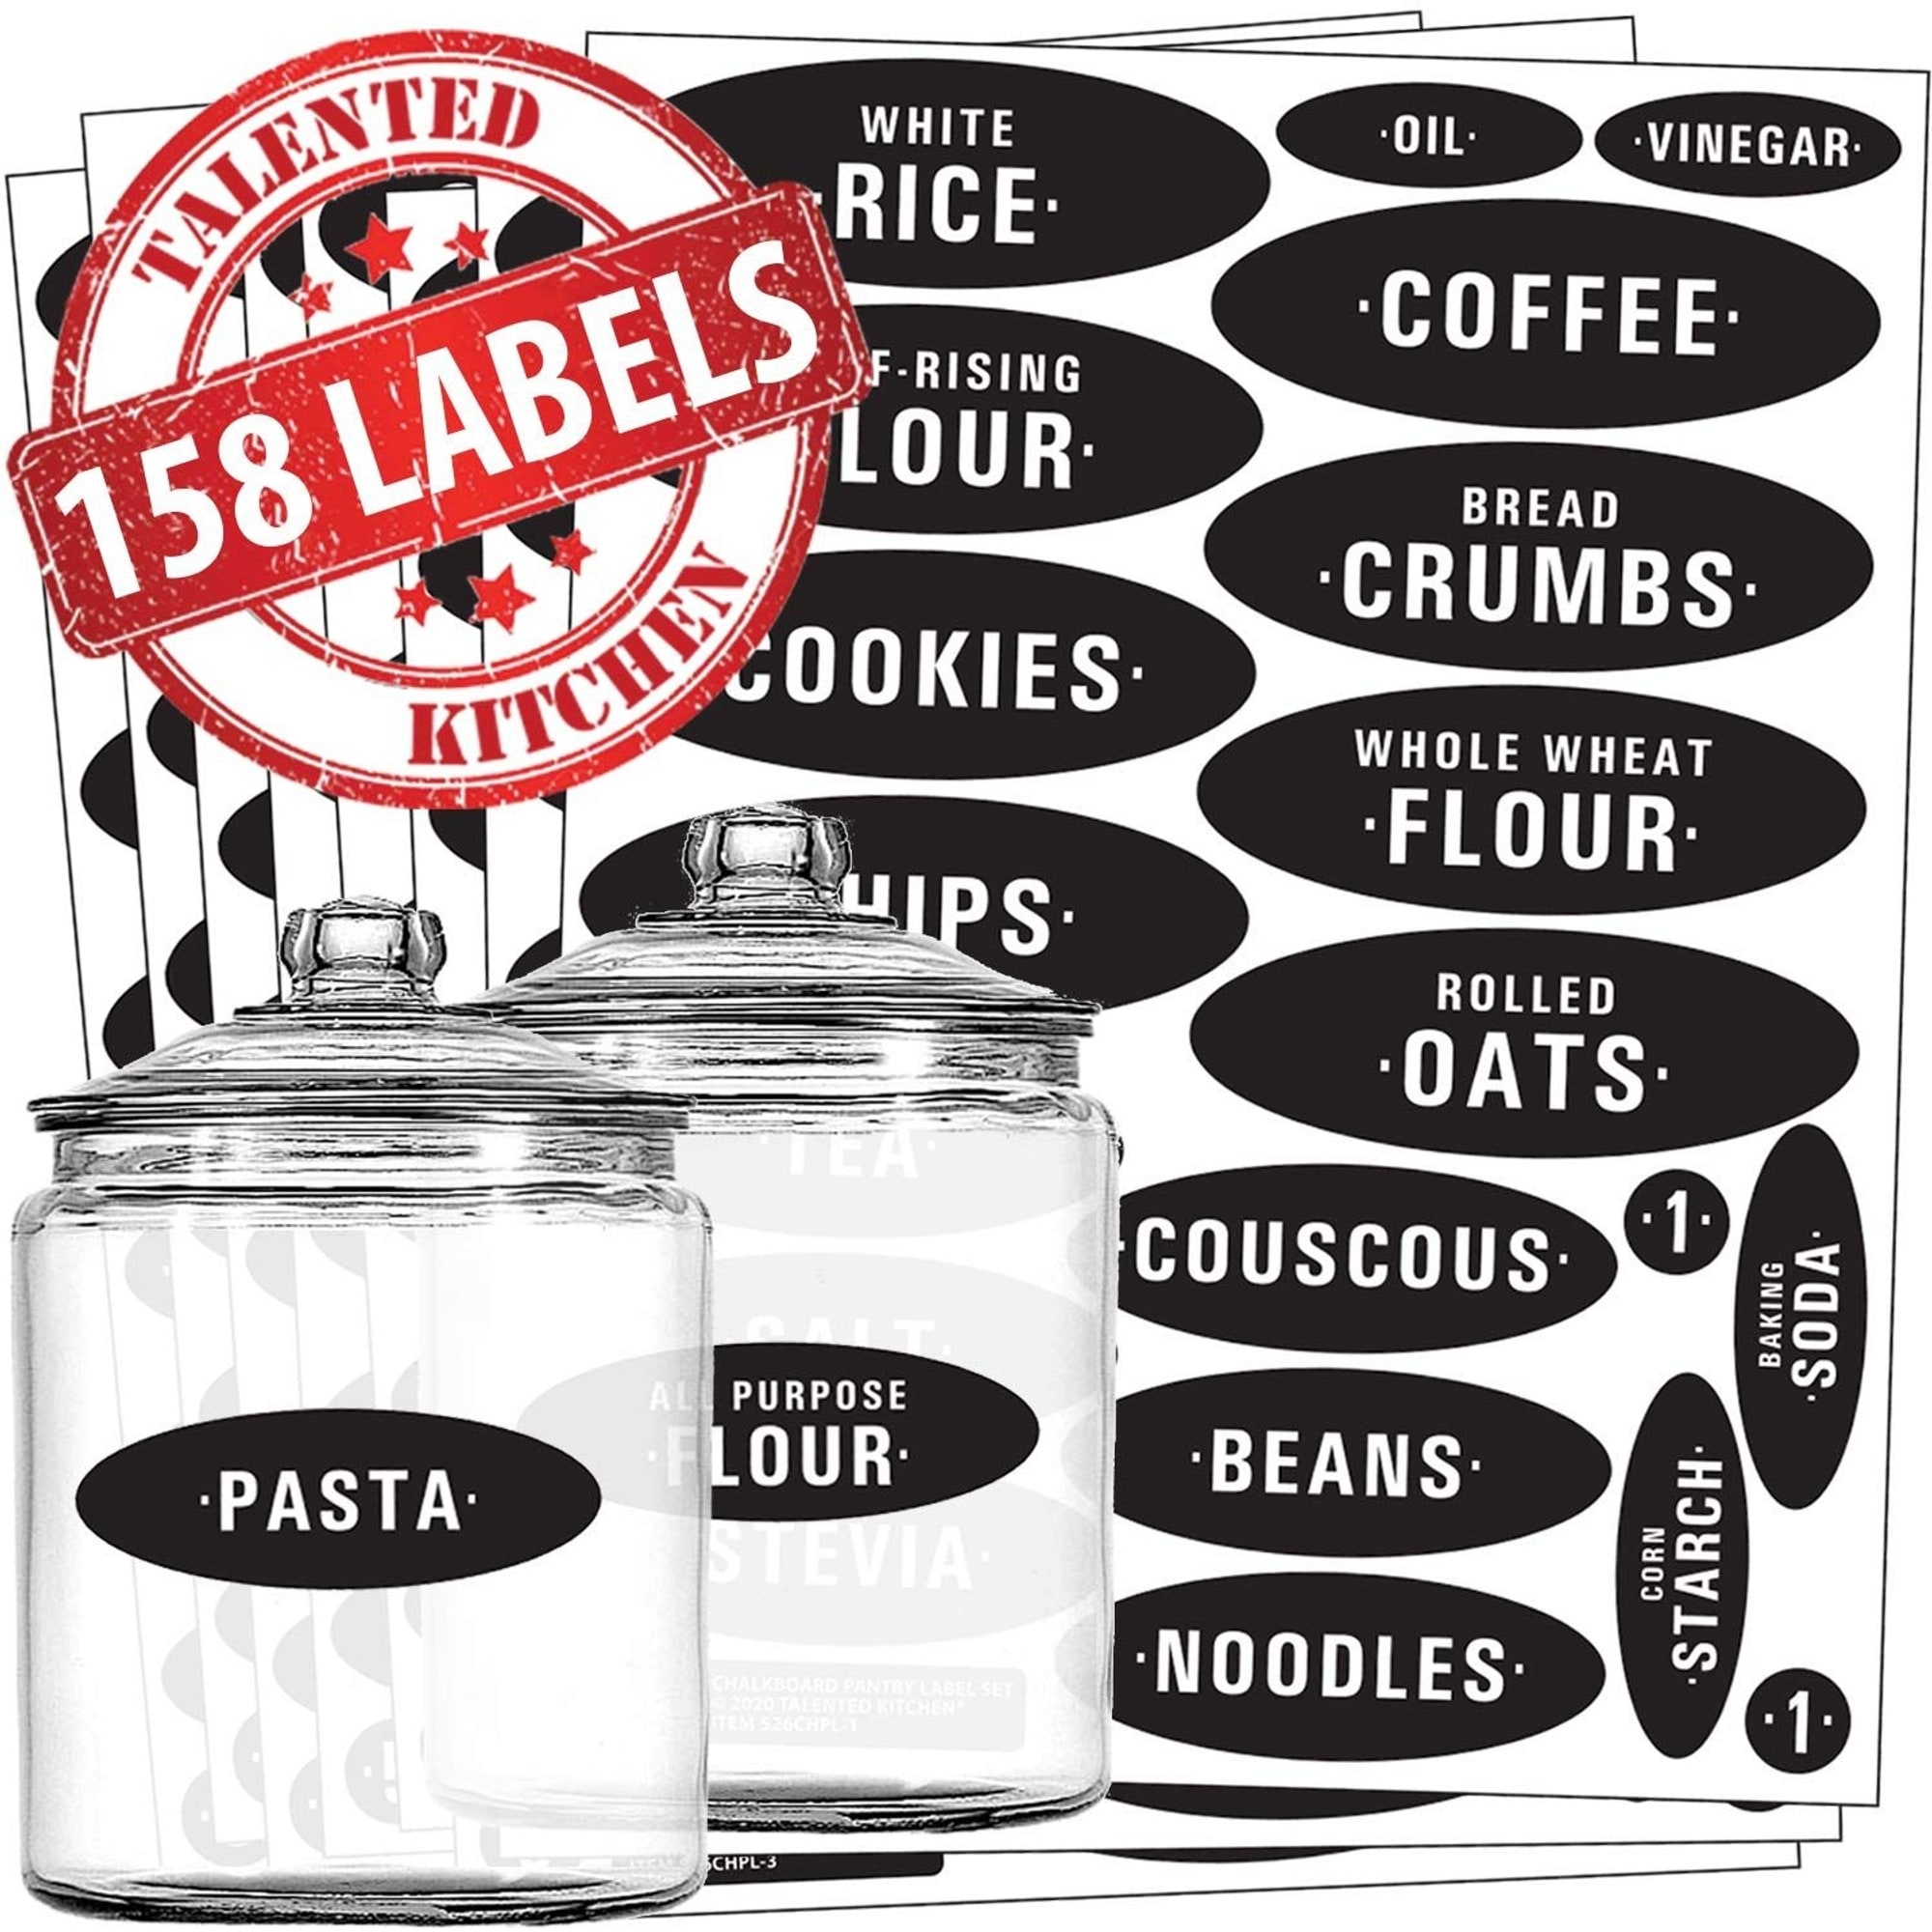 https://ak1.ostkcdn.com/images/products/is/images/direct/648ded2d85d5a4672291d629c563a9054326dea4/158-PCS-Chalkboard-Label-Sticker-for-Pantry-Food-Storage-Organizer-Jar-Container.jpg